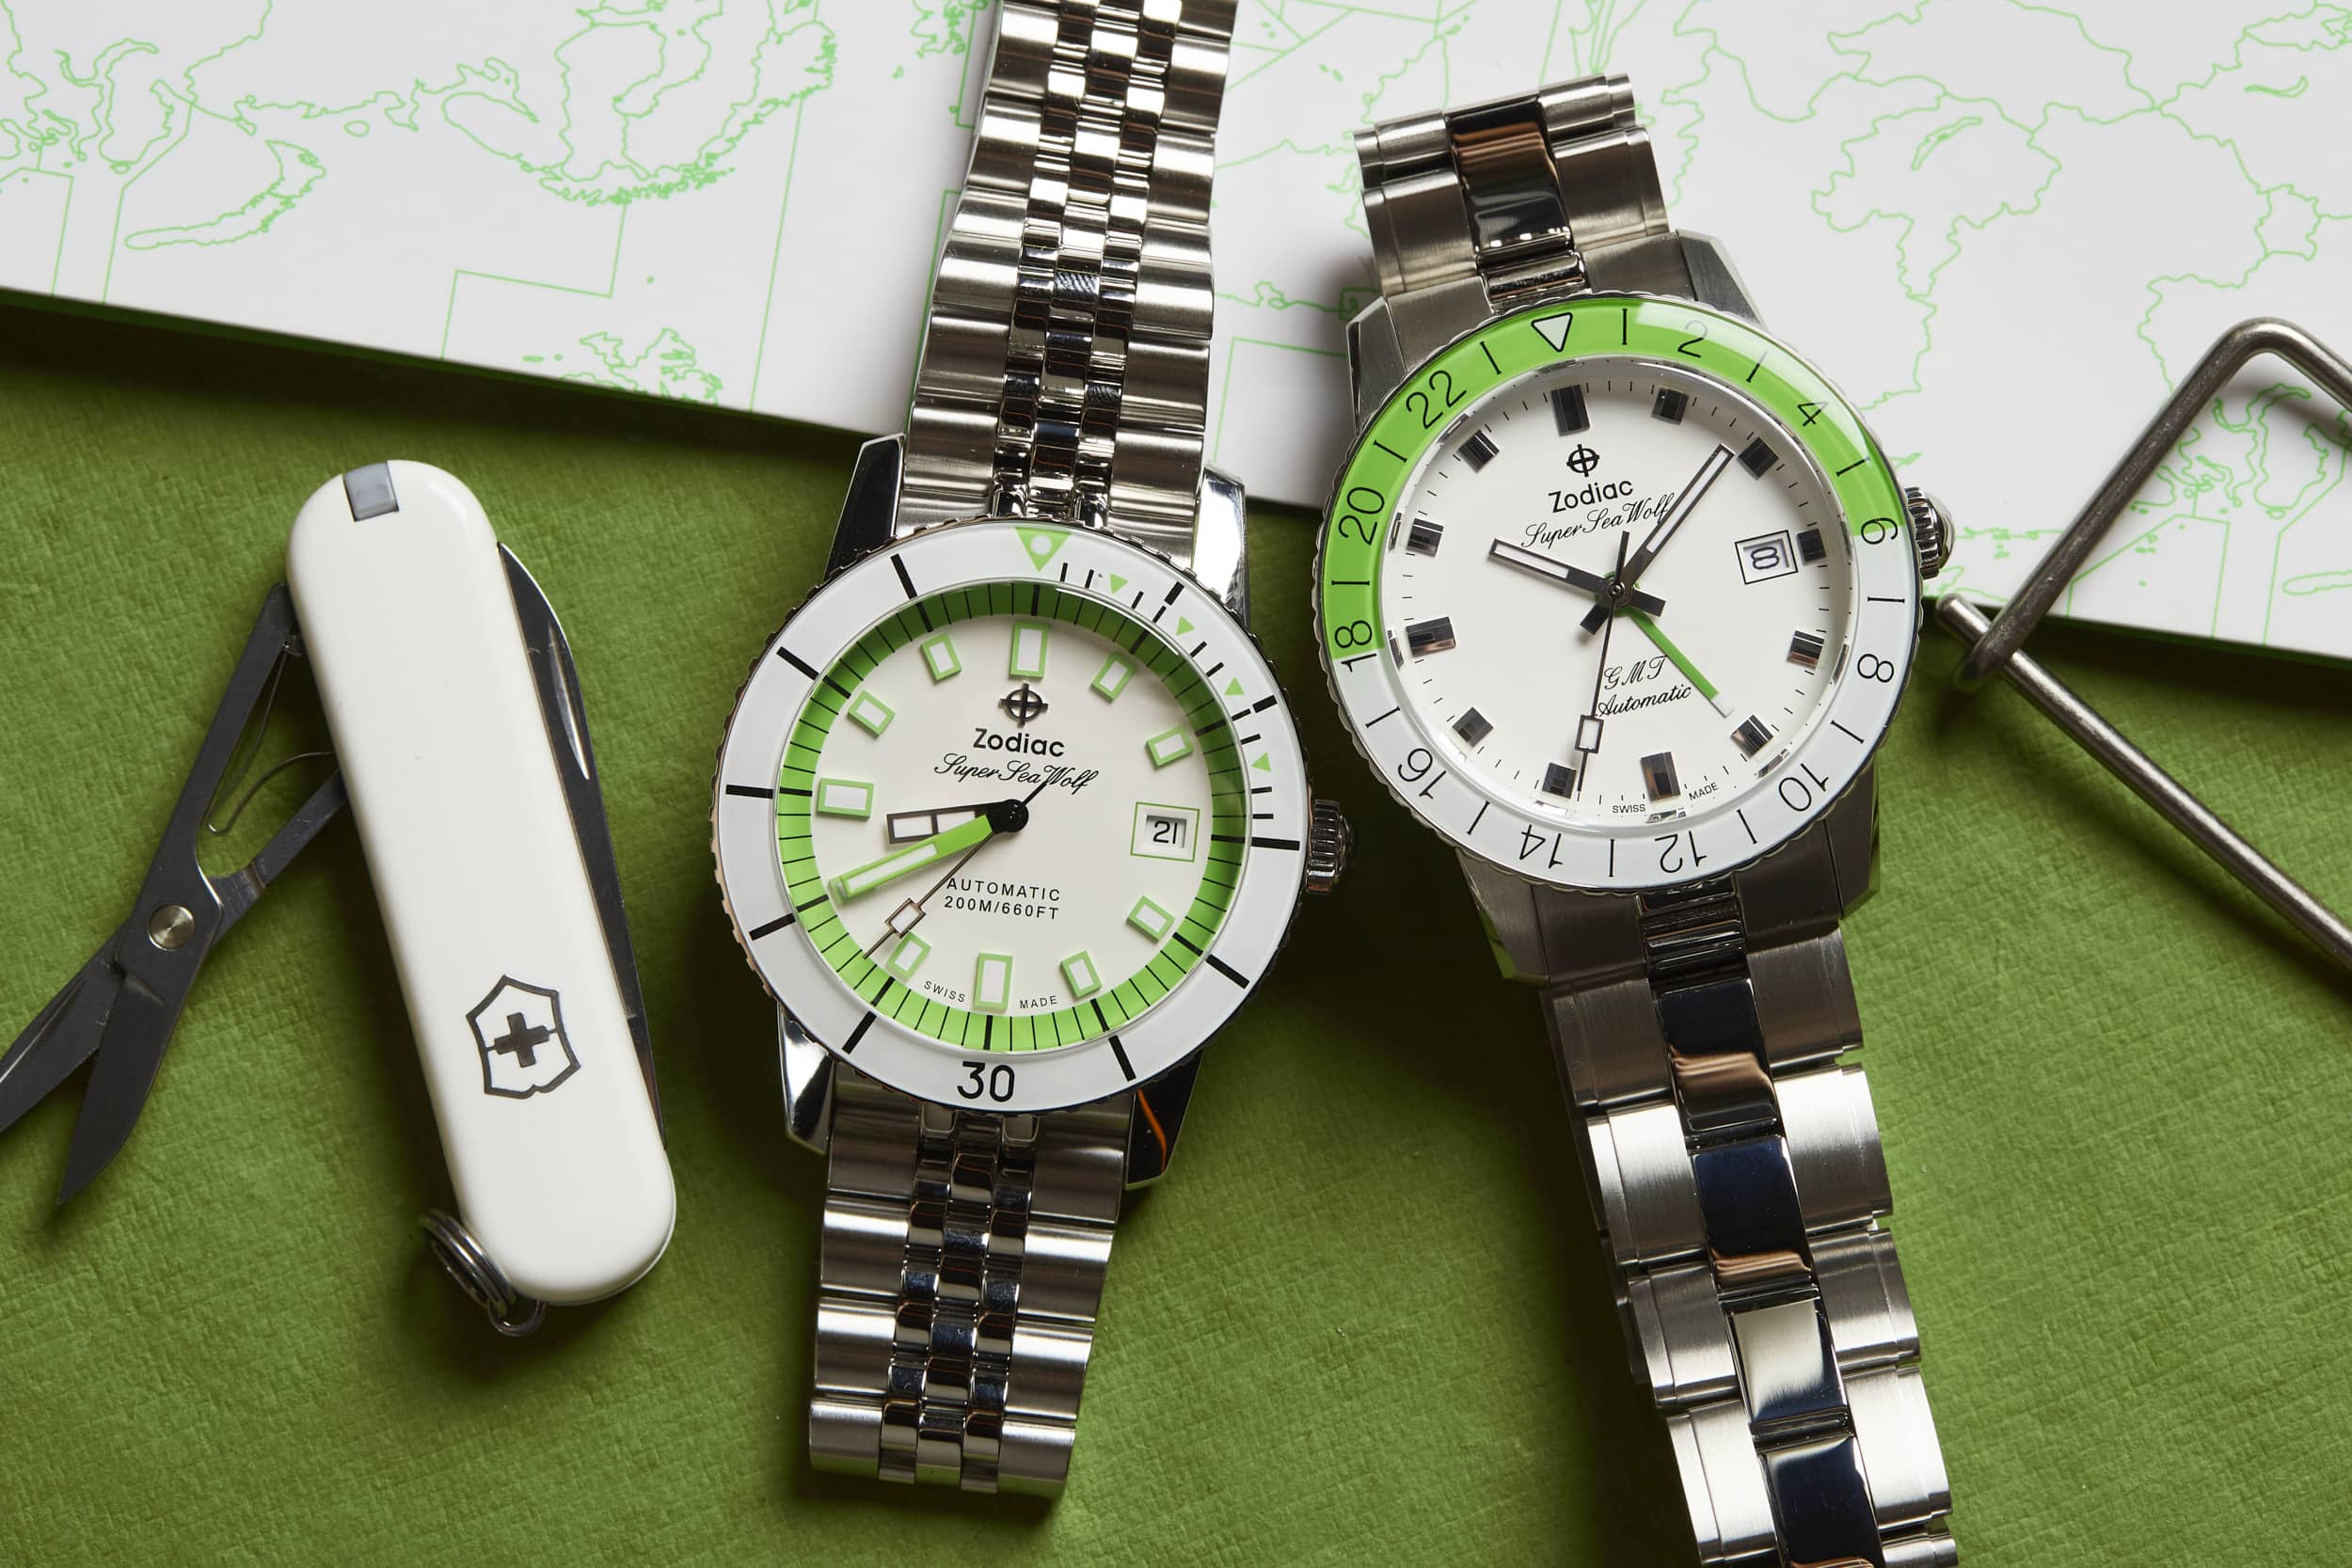 Zodiac Super Sea Wolf GMT and Compression in Neon Lime, Now Available at the Windup Watch Shop